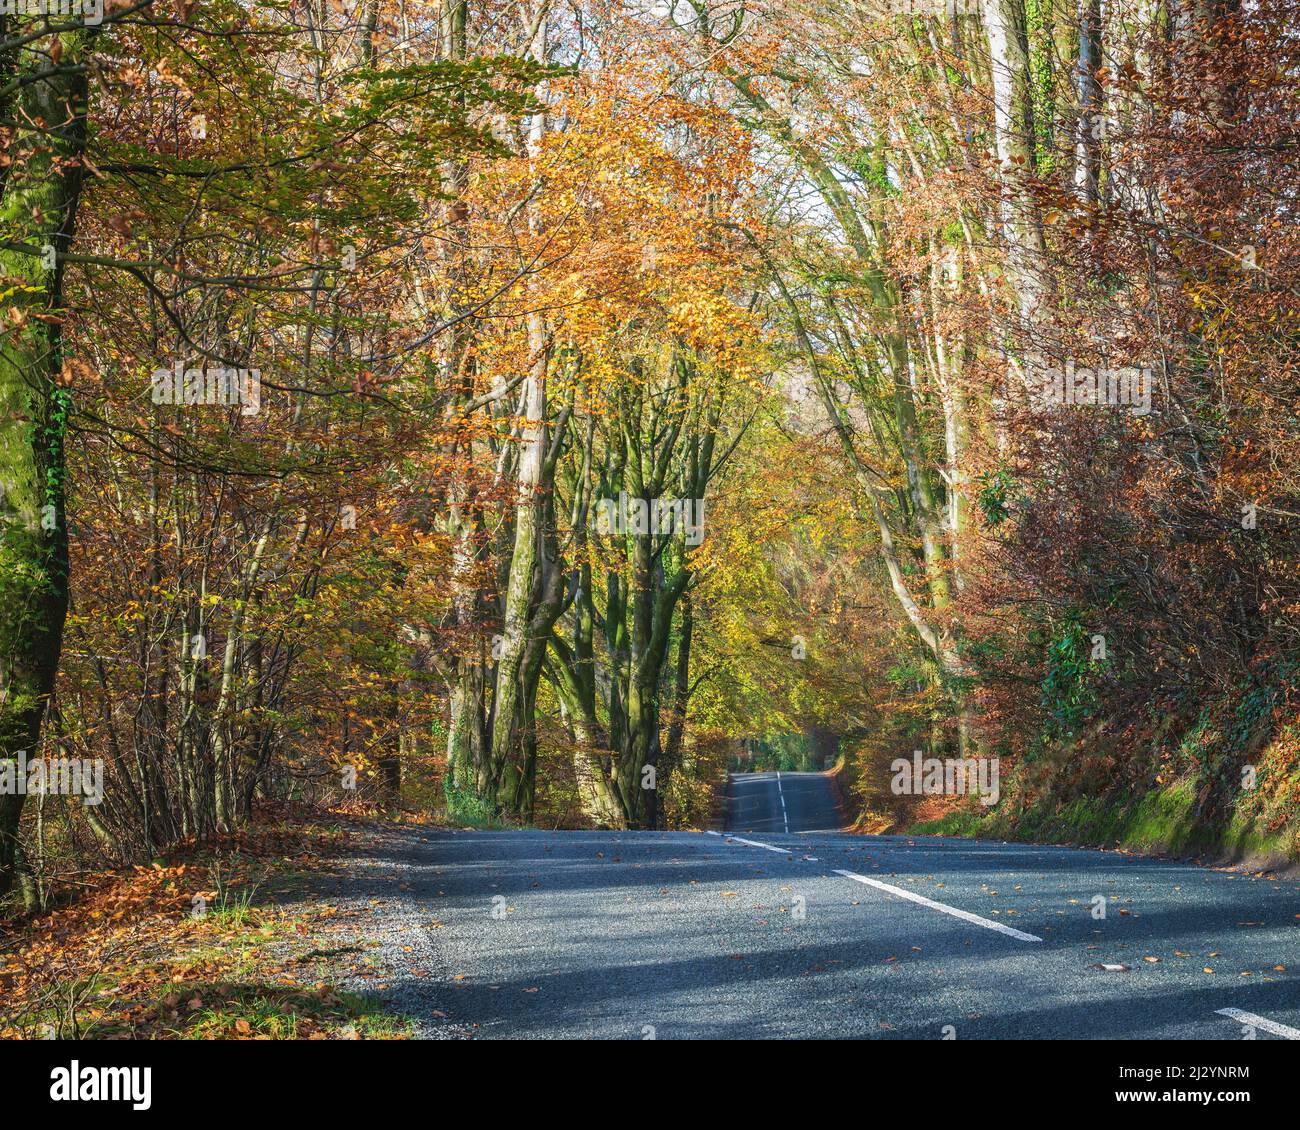 An autumnal beech tree avenue on the Blackdown Hills near Culmhead, Somerset, England, UK, part of the Blackdown Hills AONB Stock Photo